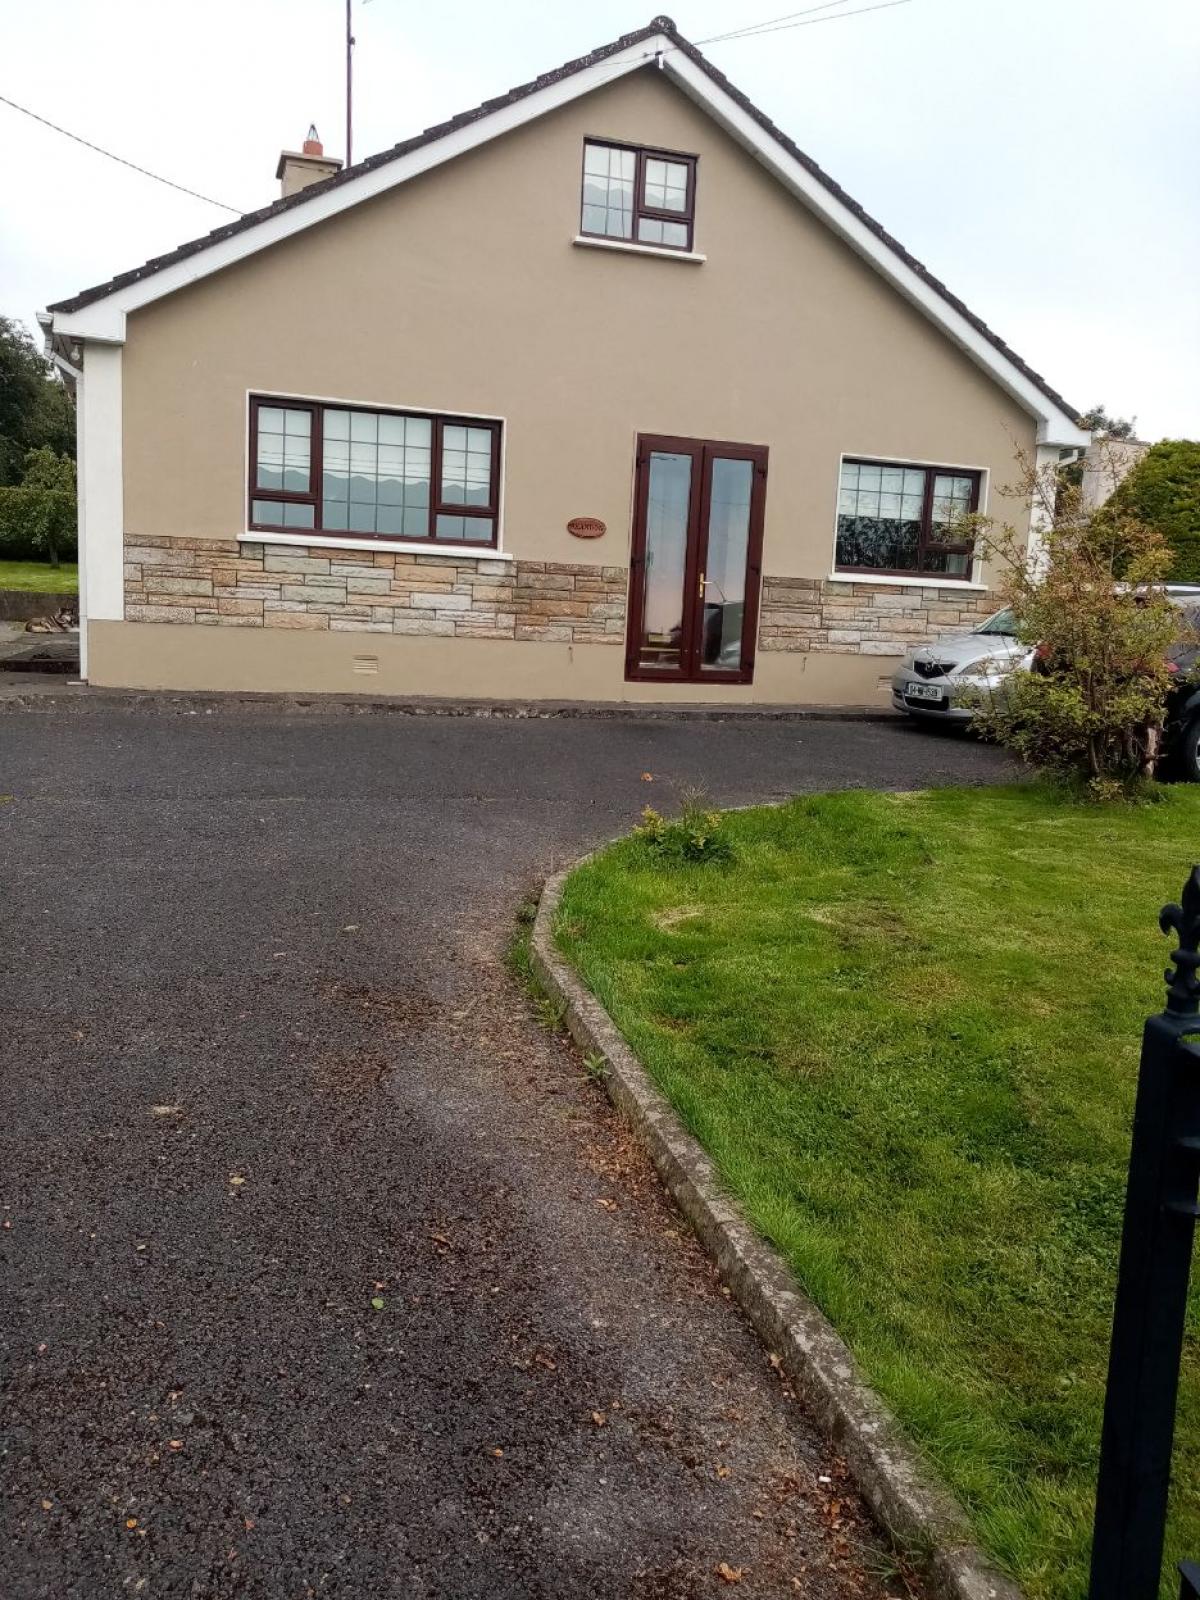 Picture of Home For Sale in Drumree, Meath, Ireland